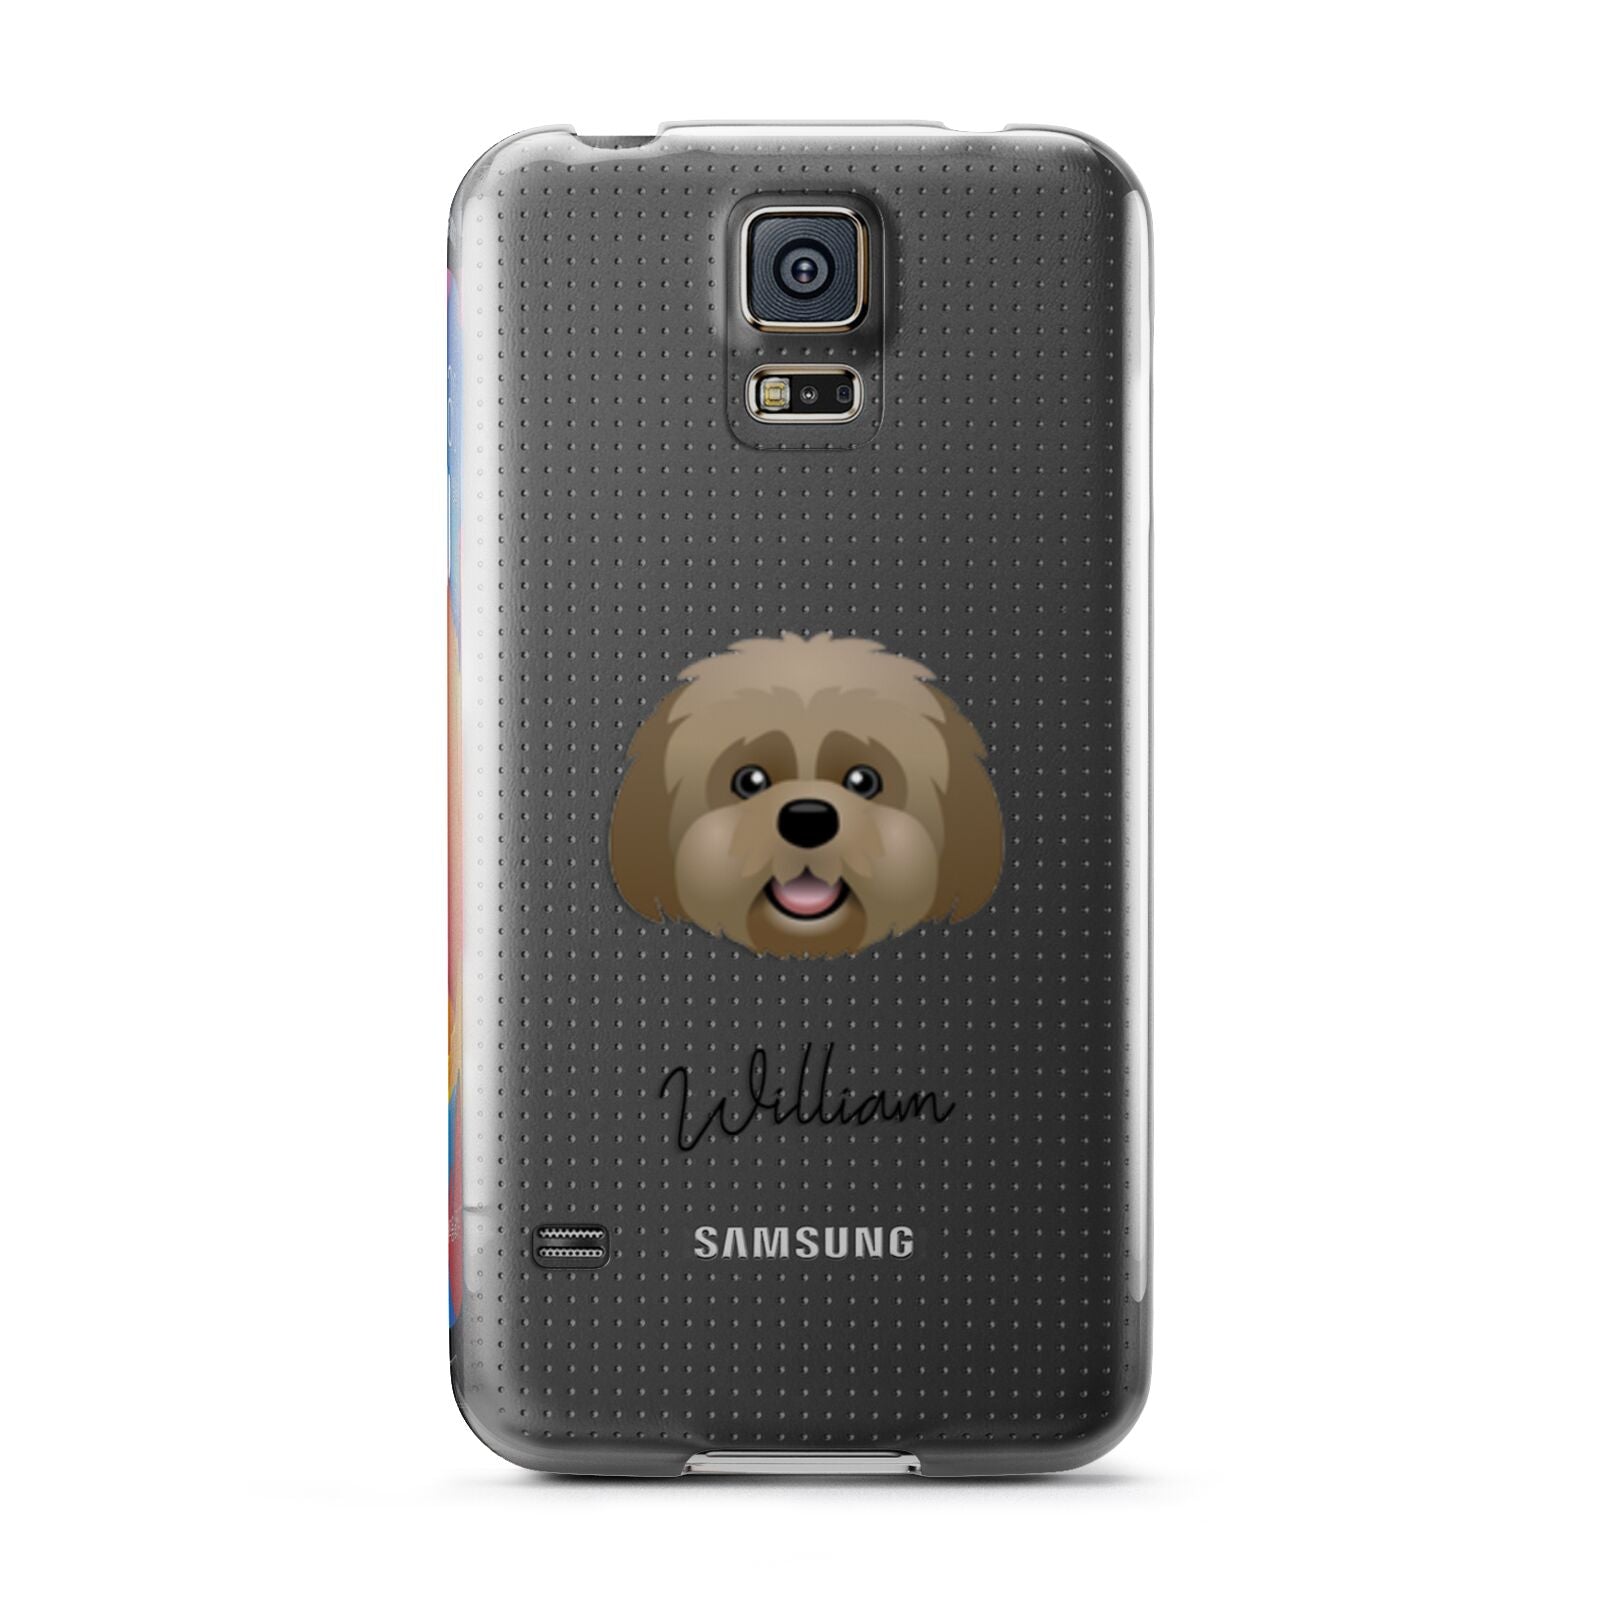 Lhatese Personalised Samsung Galaxy S5 Case